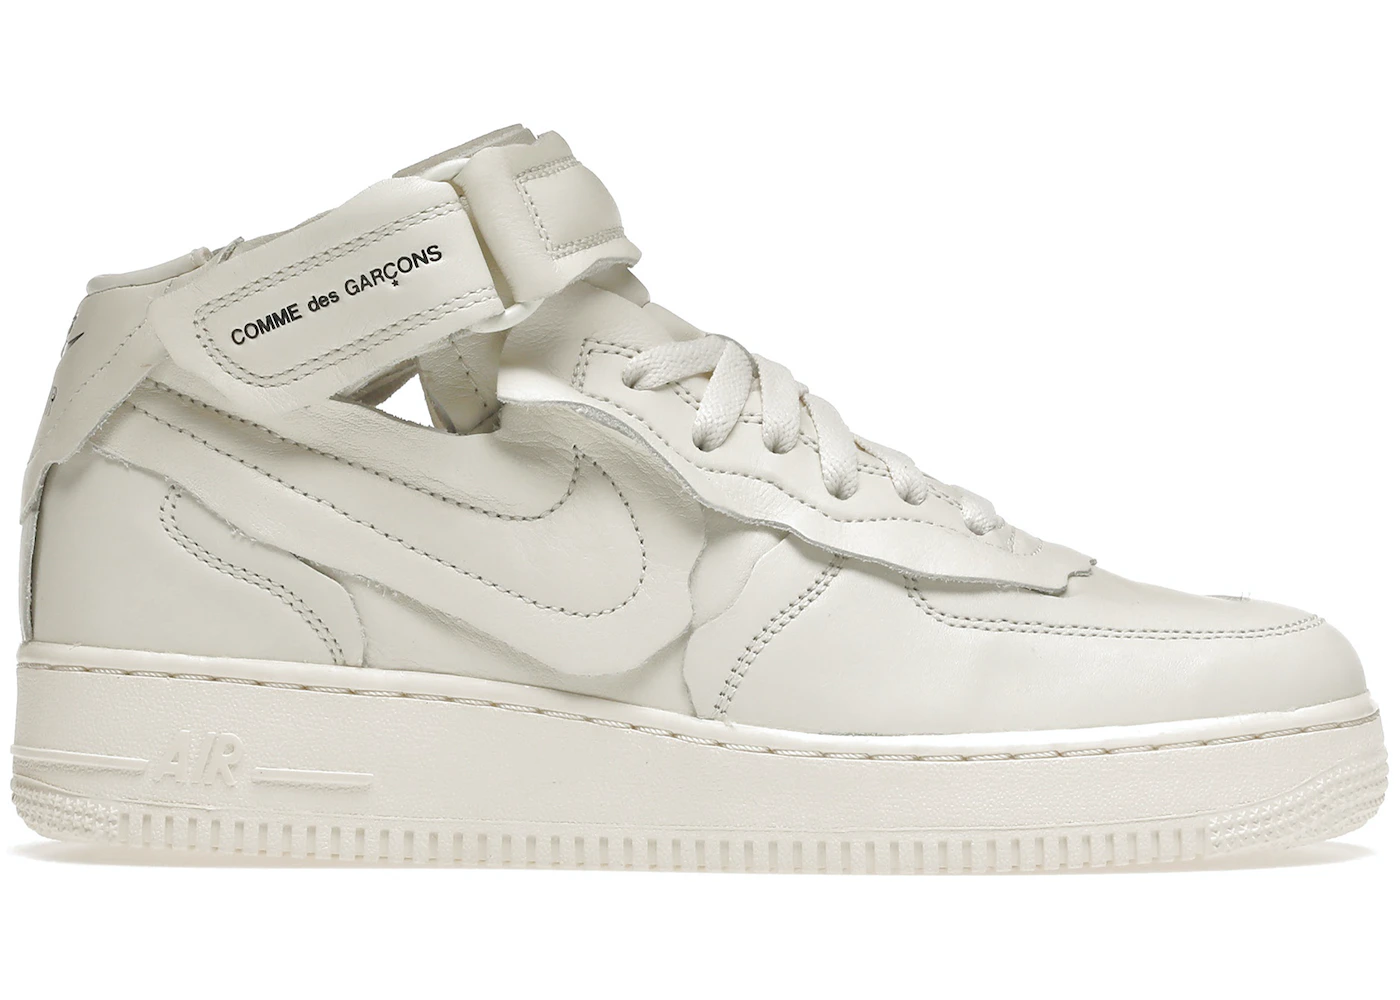 shave parts I will be strong Nike Air Force 1 Mid Comme des Garcons White - DC3601-100